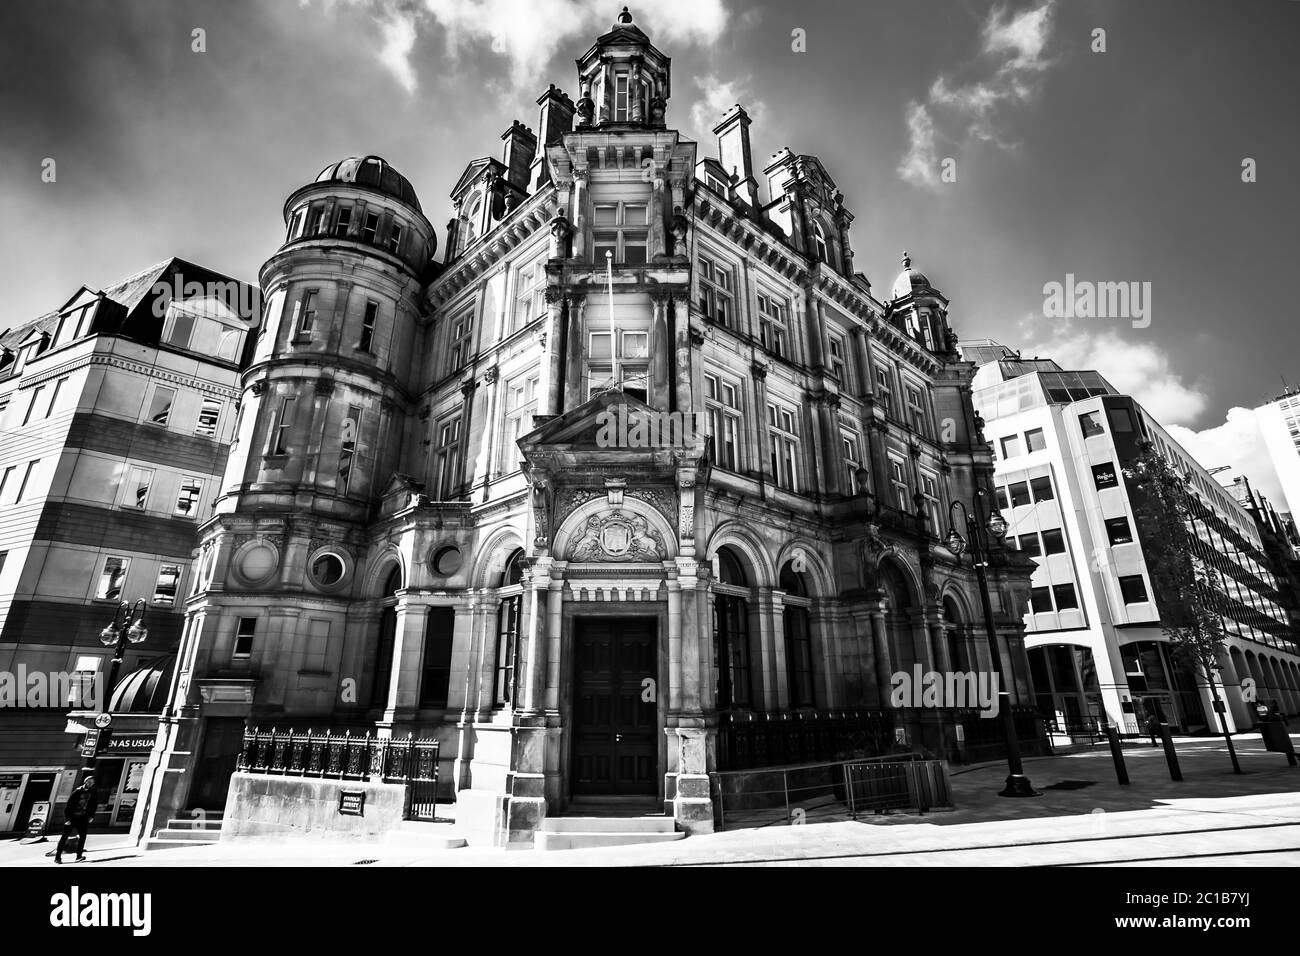 Victoria Square House, at the top of New Street, Birmingham. Black and White HDR image. Stock Photo